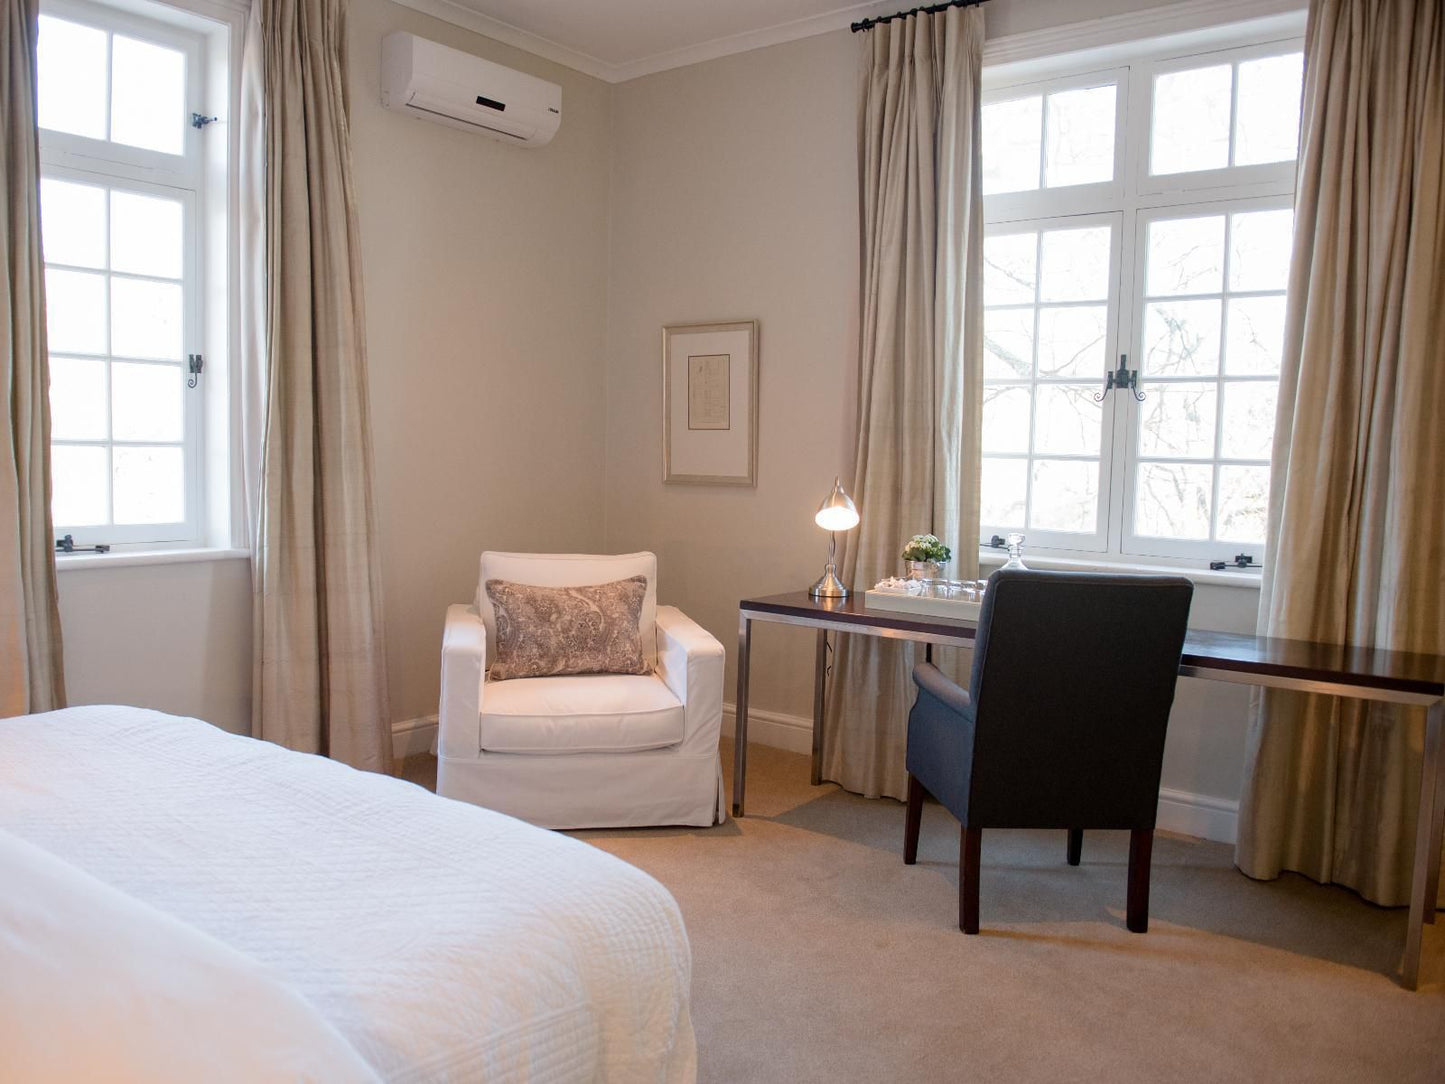 River Manor Boutique Hotel And Spa Stellenbosch Western Cape South Africa Bedroom